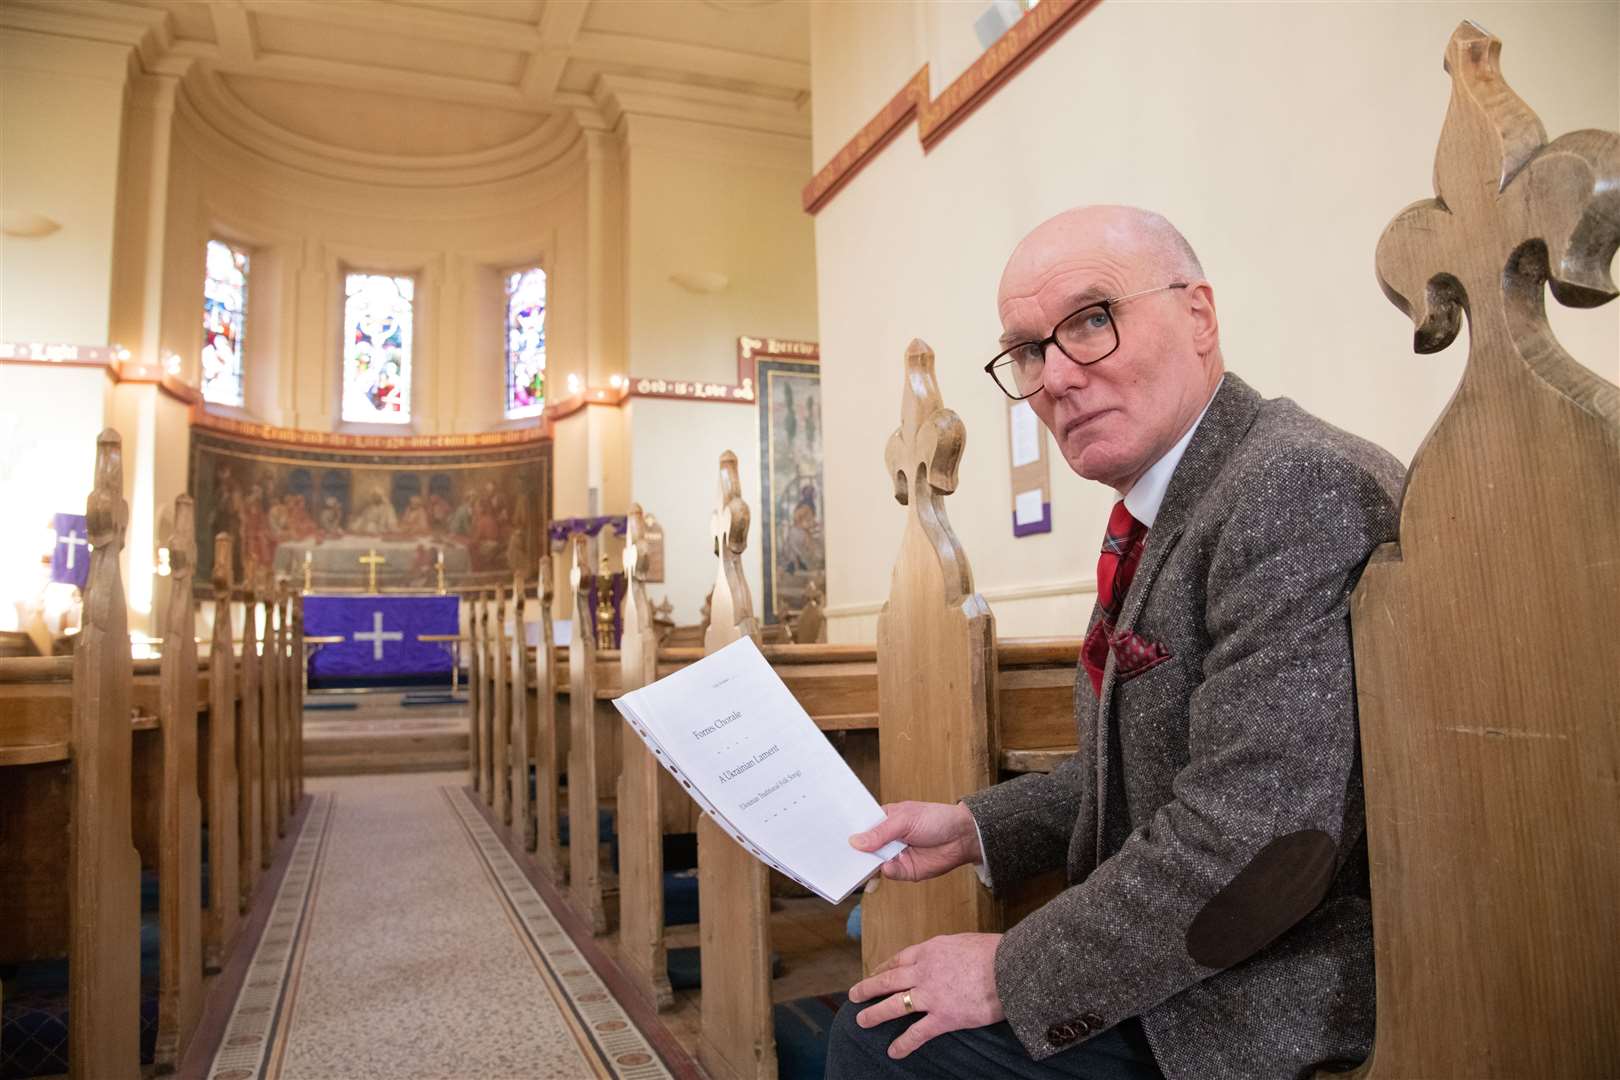 Brian Smith at the St John's Church in Forres where the Forres Chorale will hold a concert on October 29. Picture: Daniel Forsyth